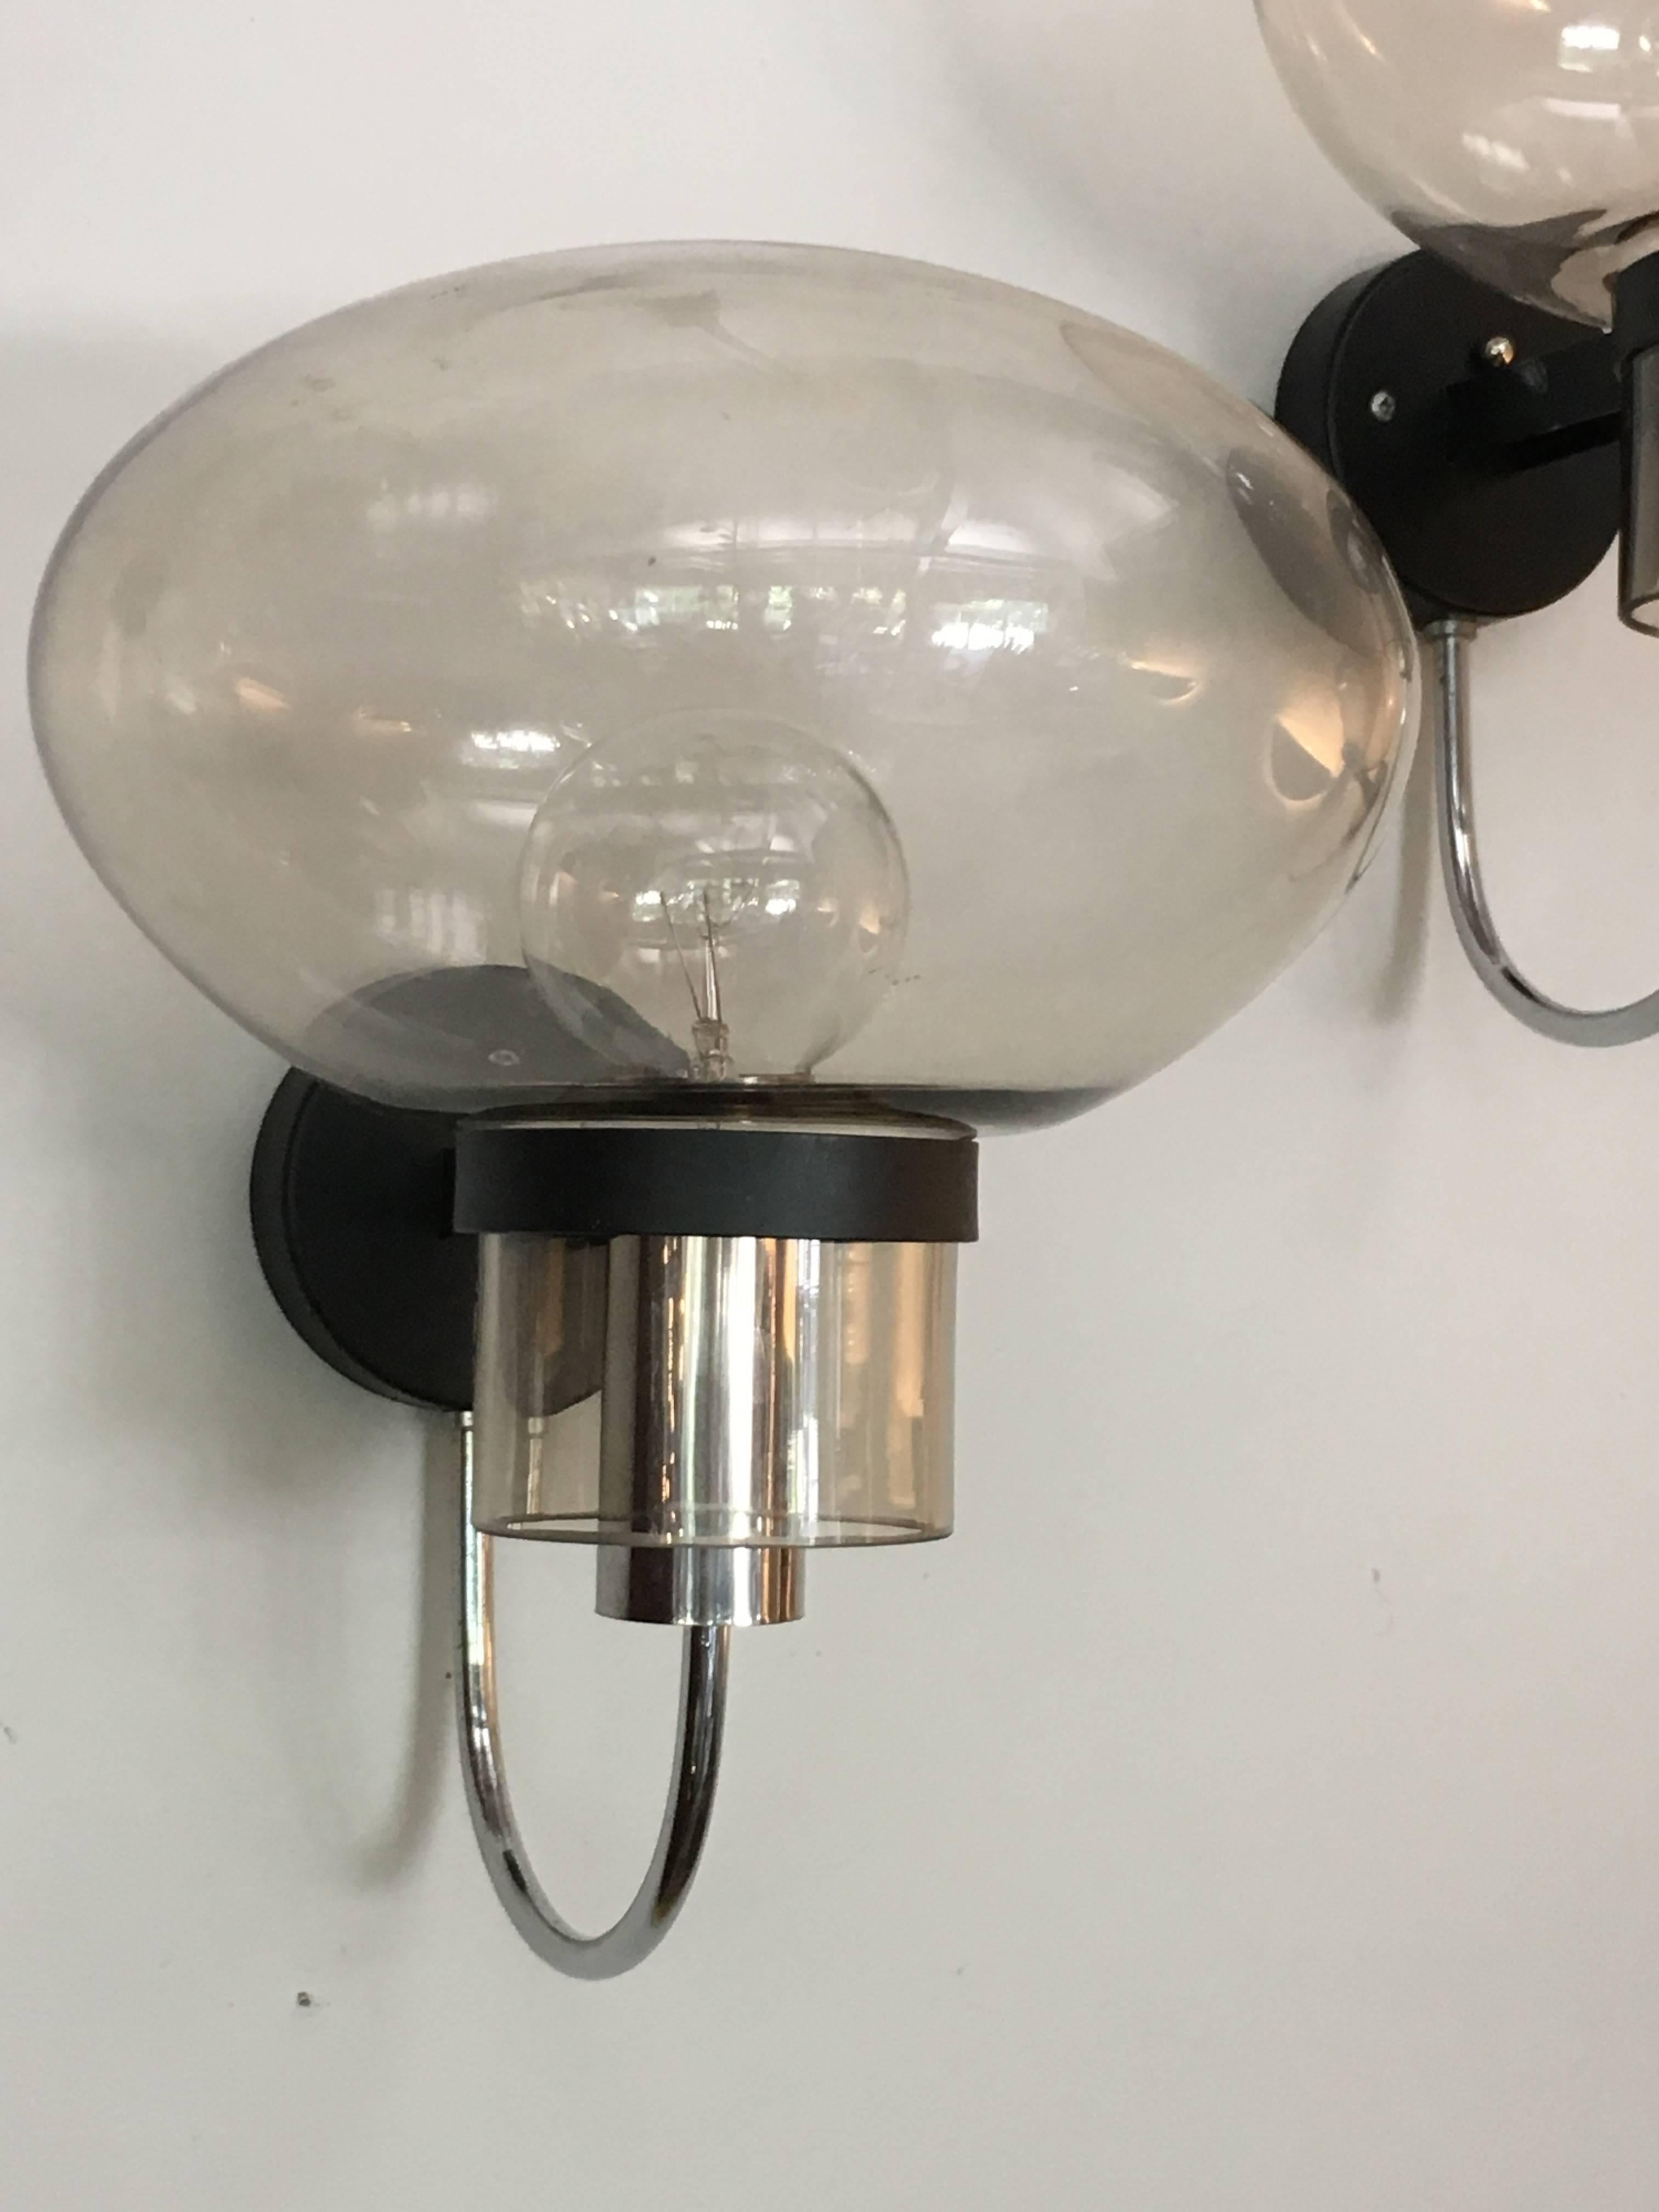 1960s Italian wall lights by Oluce with mushroom shaped glass globes.

Avantgarden Ltd. cultivates unexpected and exceptional lighting, furniture and design.  To view items in person please visit our showroom in Pound Ridge, New York. 